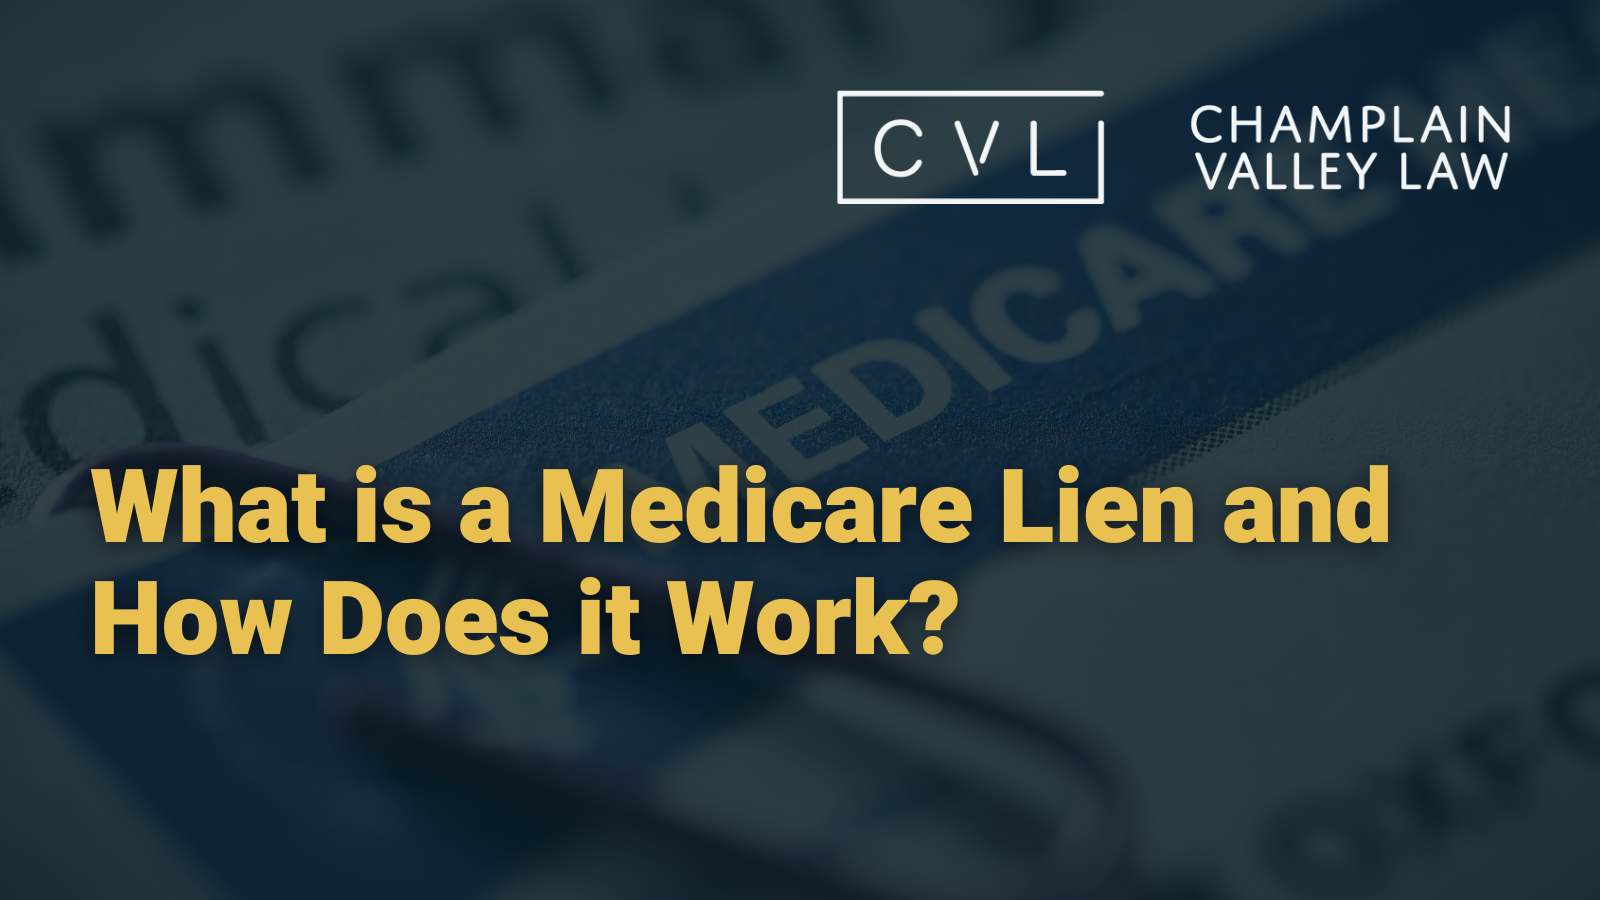 What is a Medicare Lien and How Does it Work?